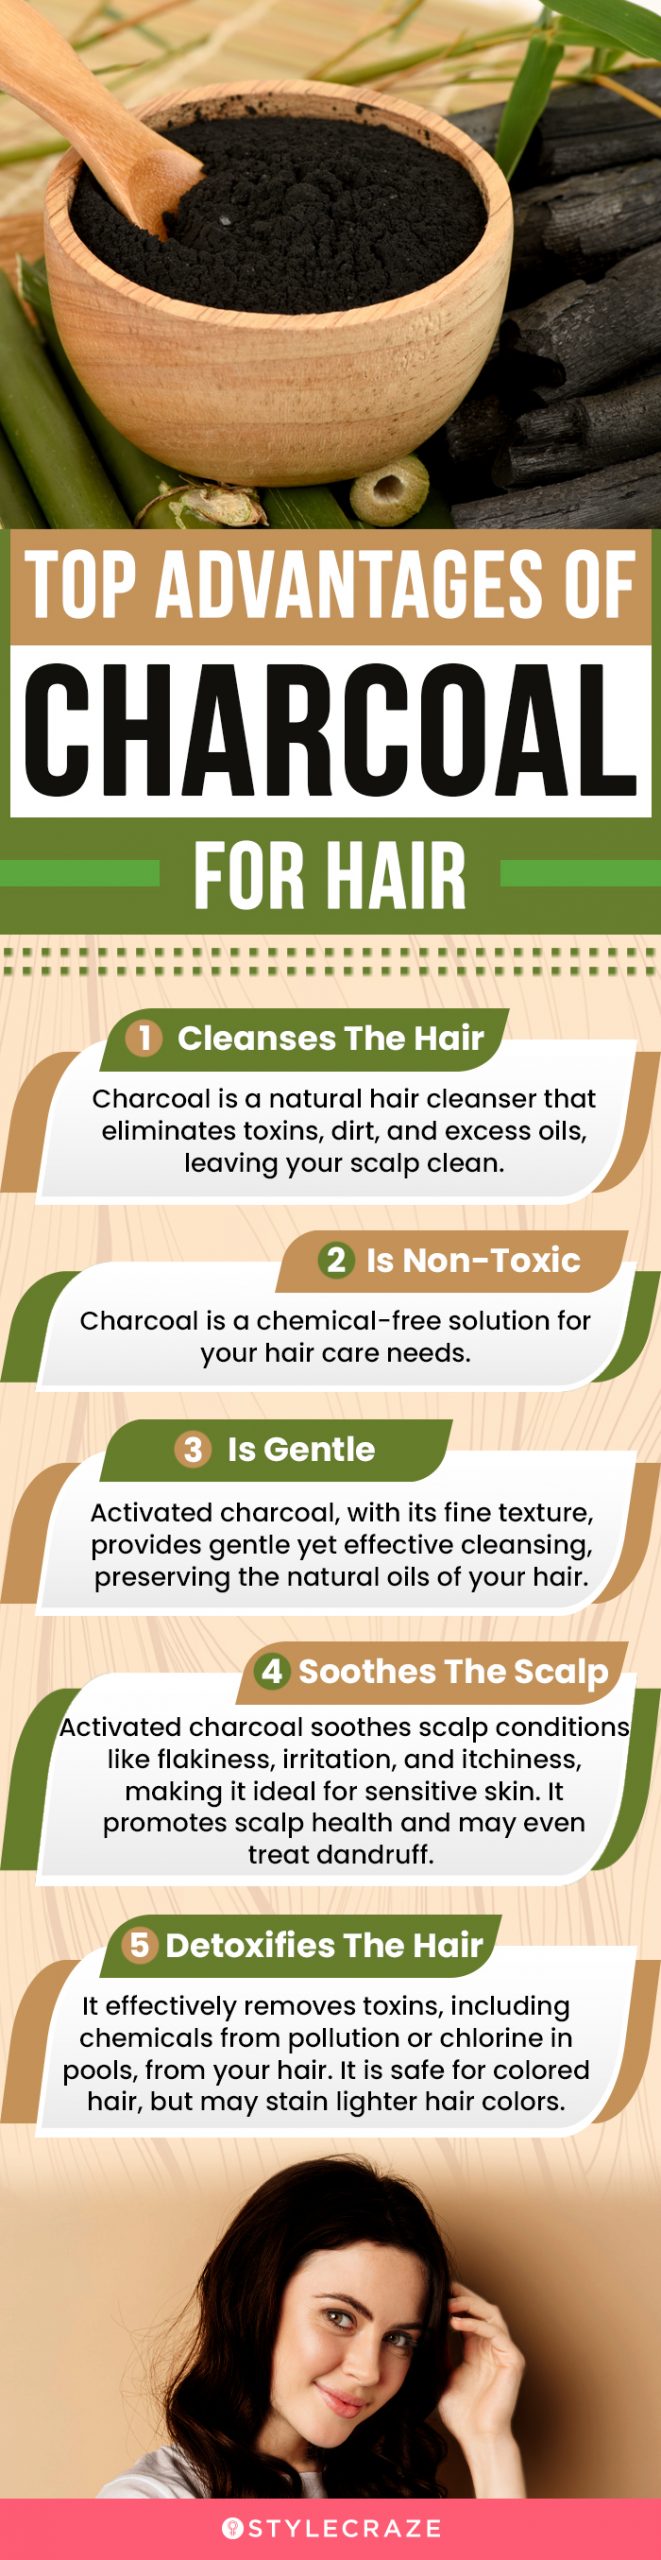 top advantages of charcoal for hair (infographic)